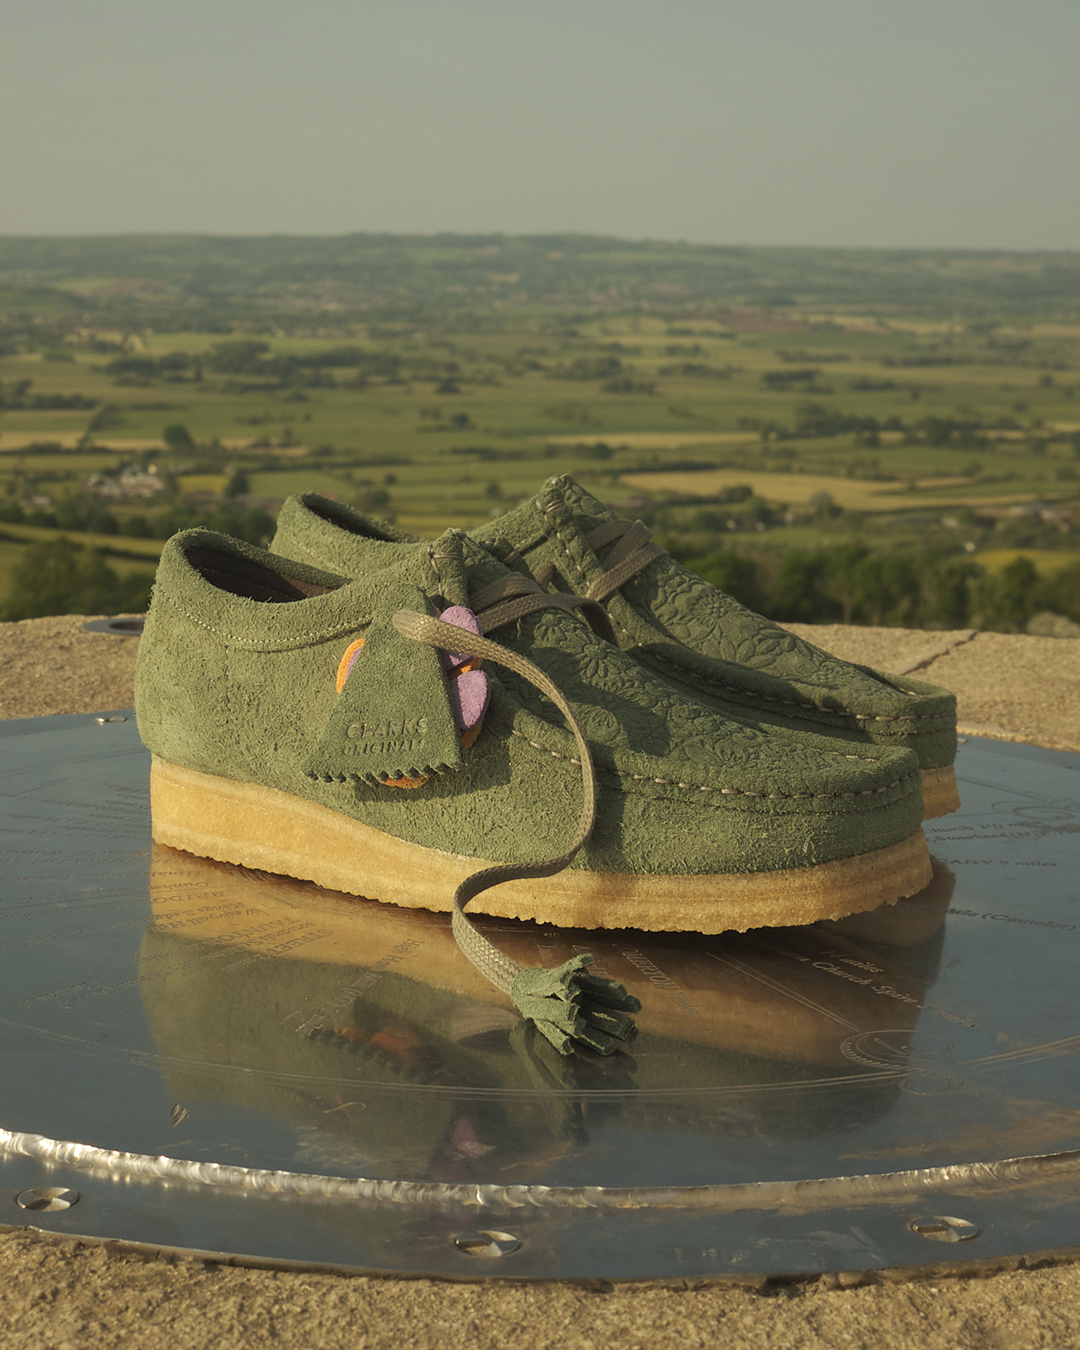 size? on Twitter: "First arriving the footwear scene the '60s, we have reimagined @ClarksOriginals' iconic silhouette - introducing the Clarks Originals™ 'Glastonbury' - size?exclusive. Available online now &amp;